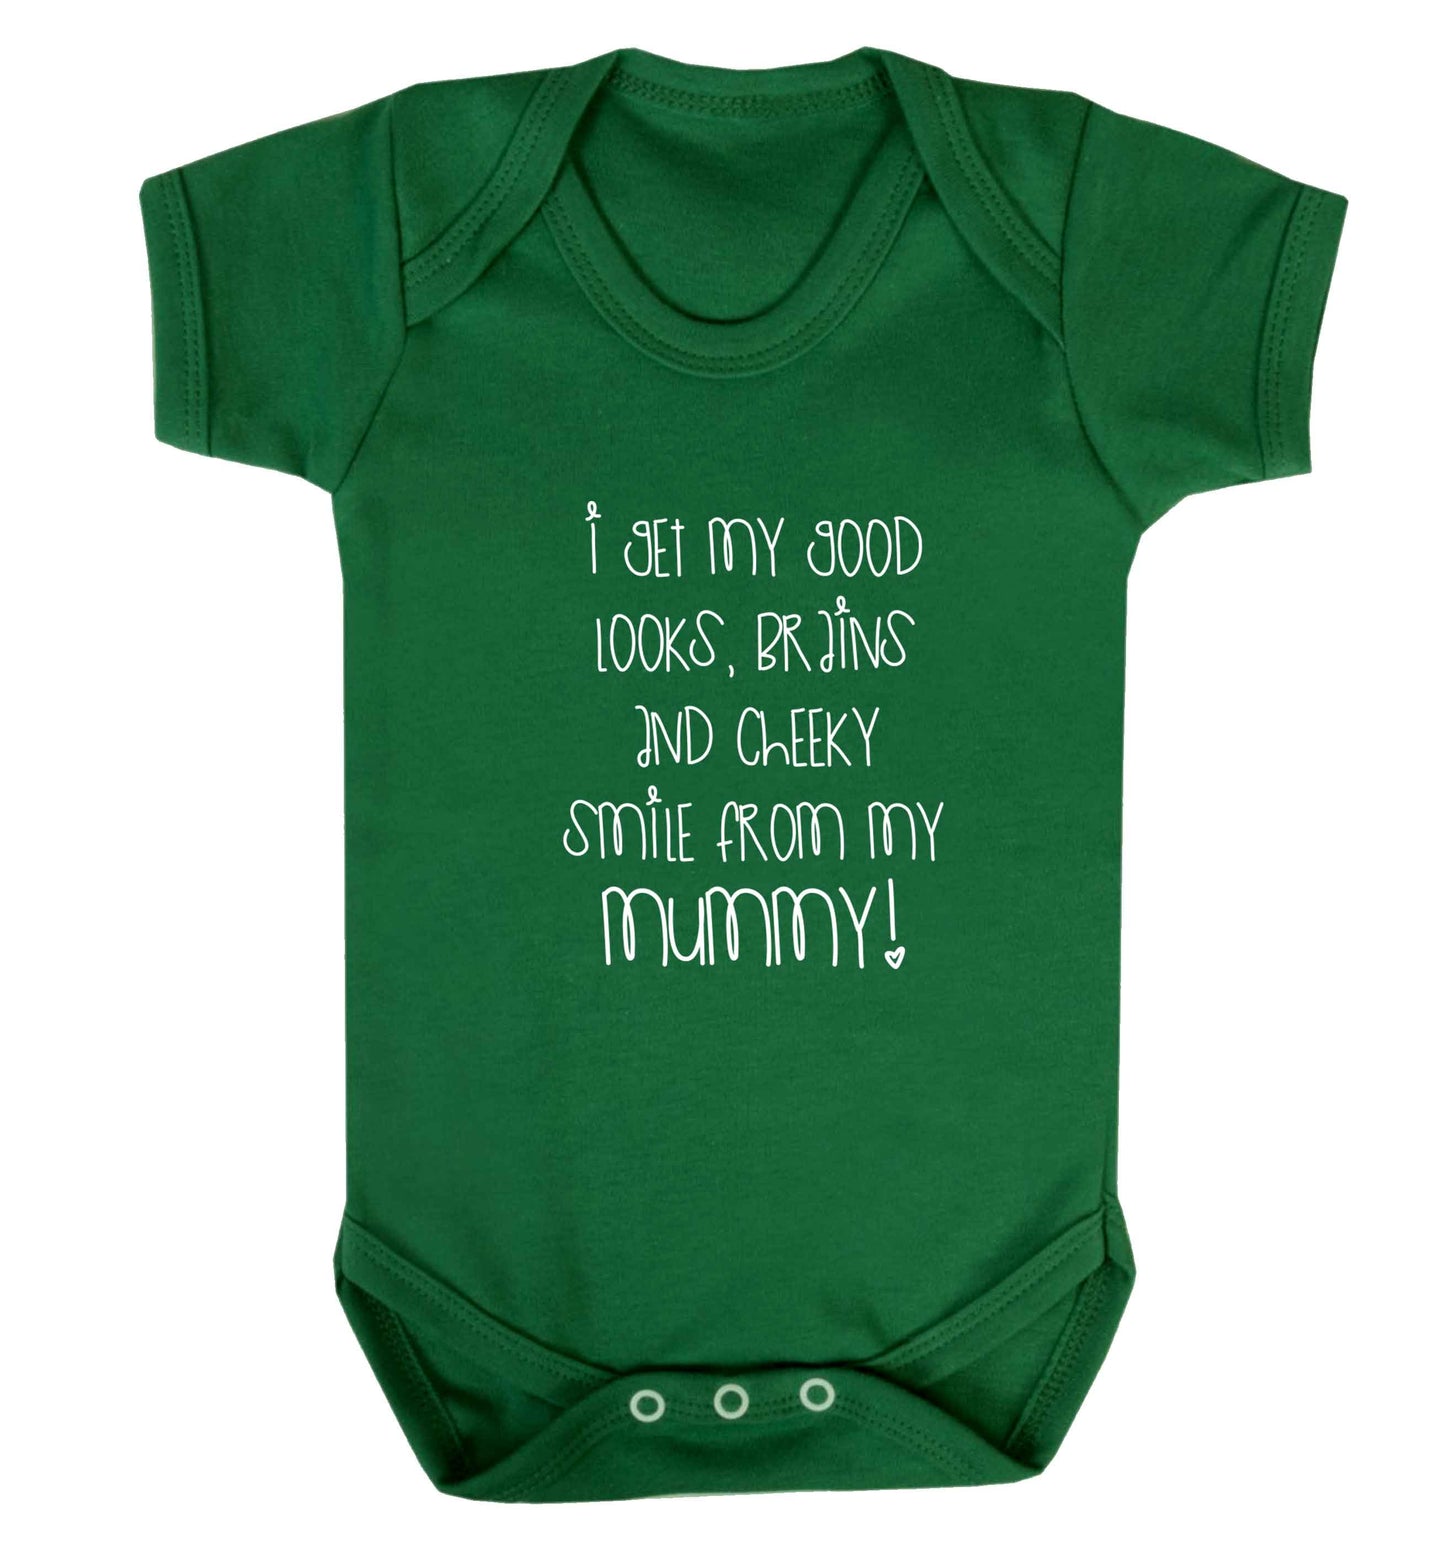 I get my good looks, brains and cheeky smile from my mummy baby vest green 18-24 months